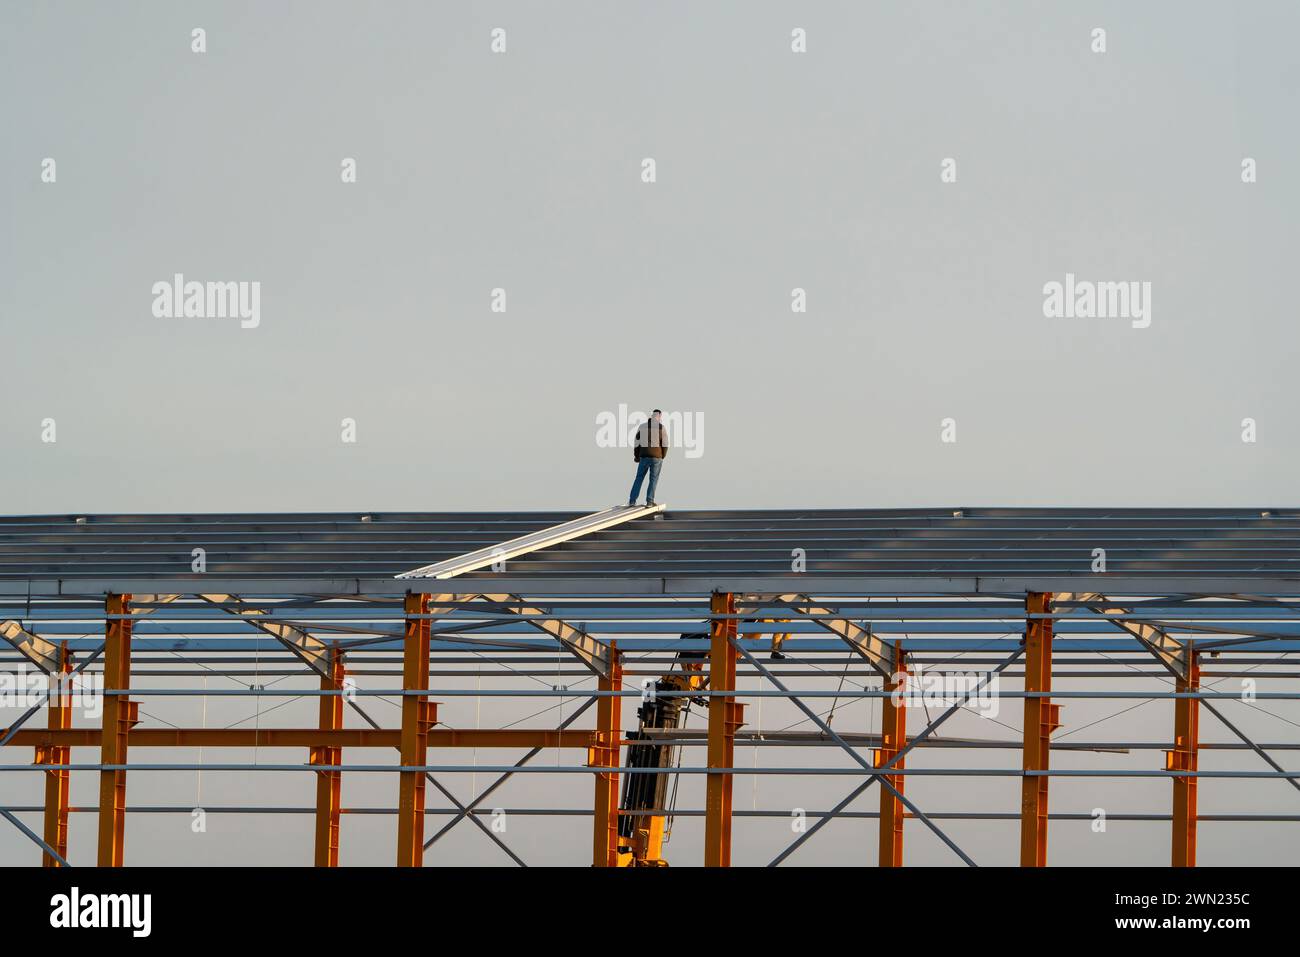 A person standing on a steel construction building Stock Photo